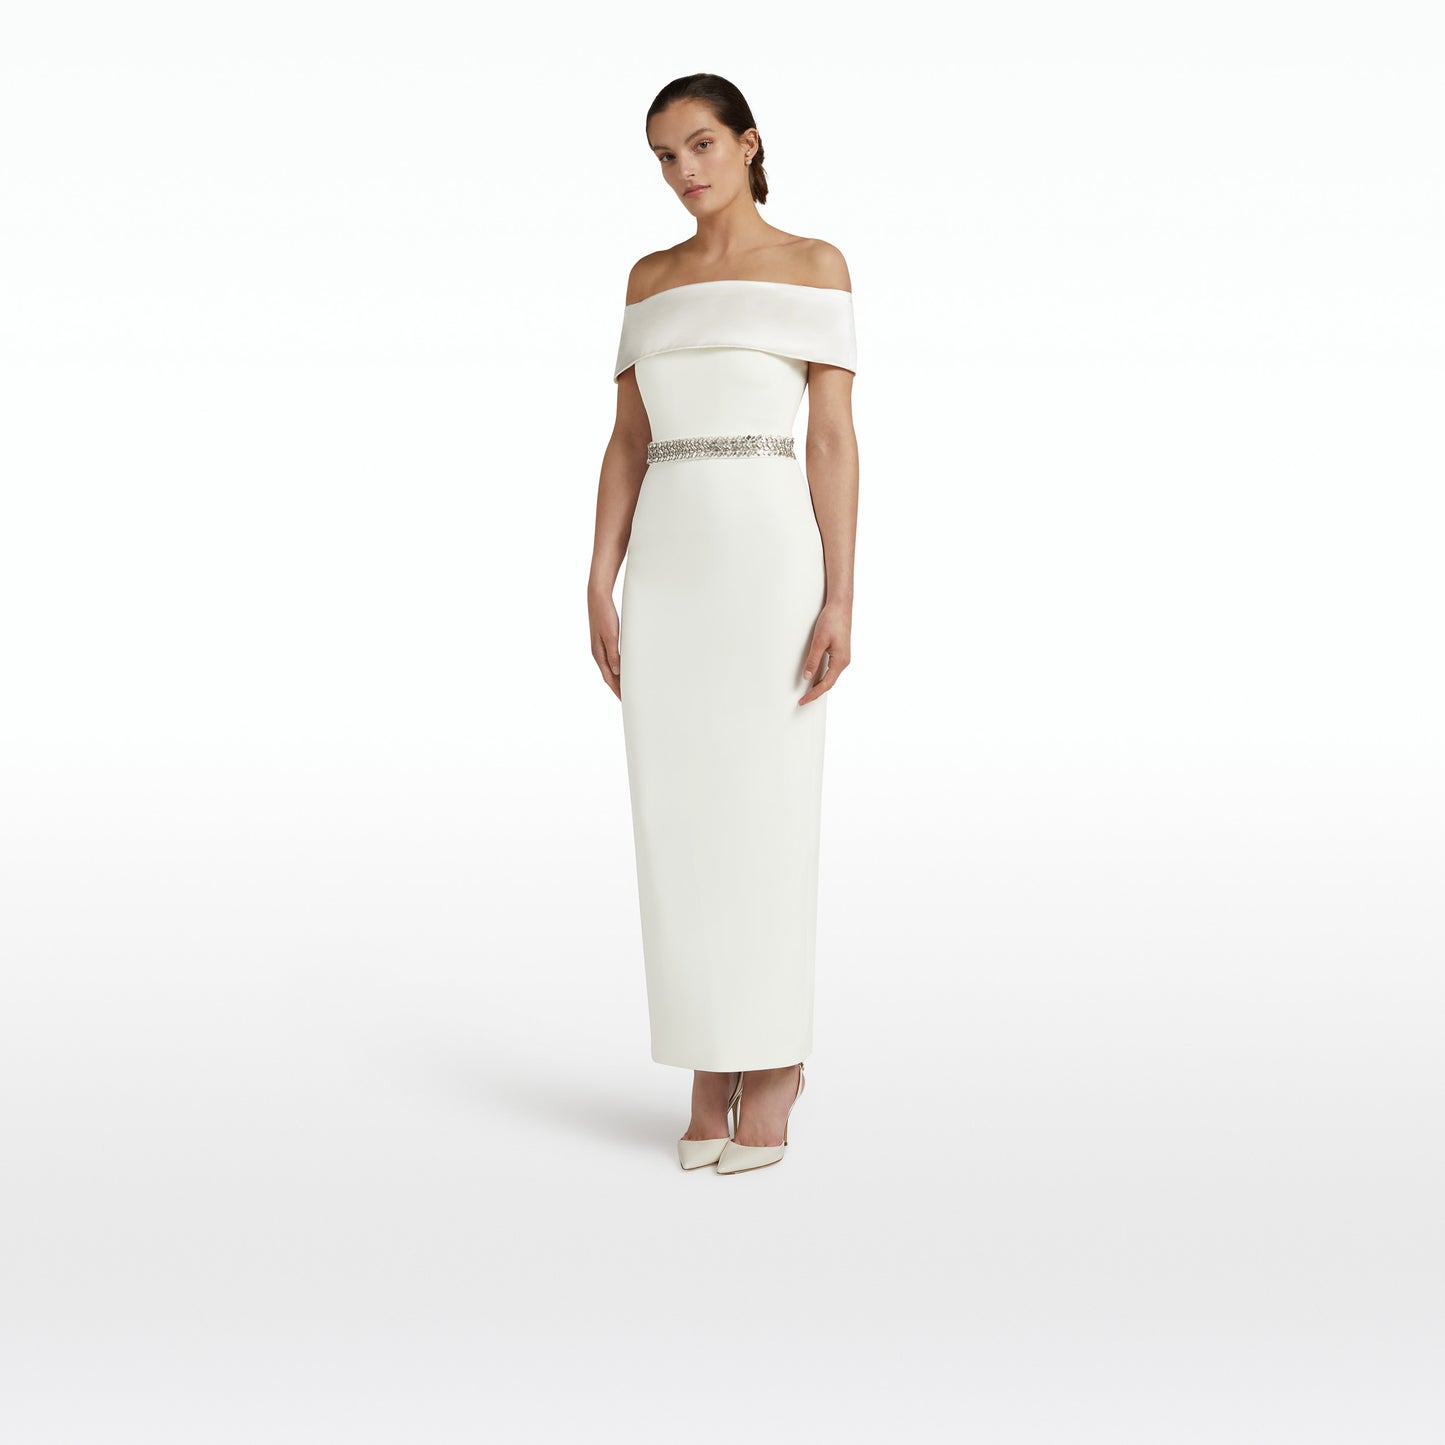 Drax Ivory Dress With Embroidered Belt